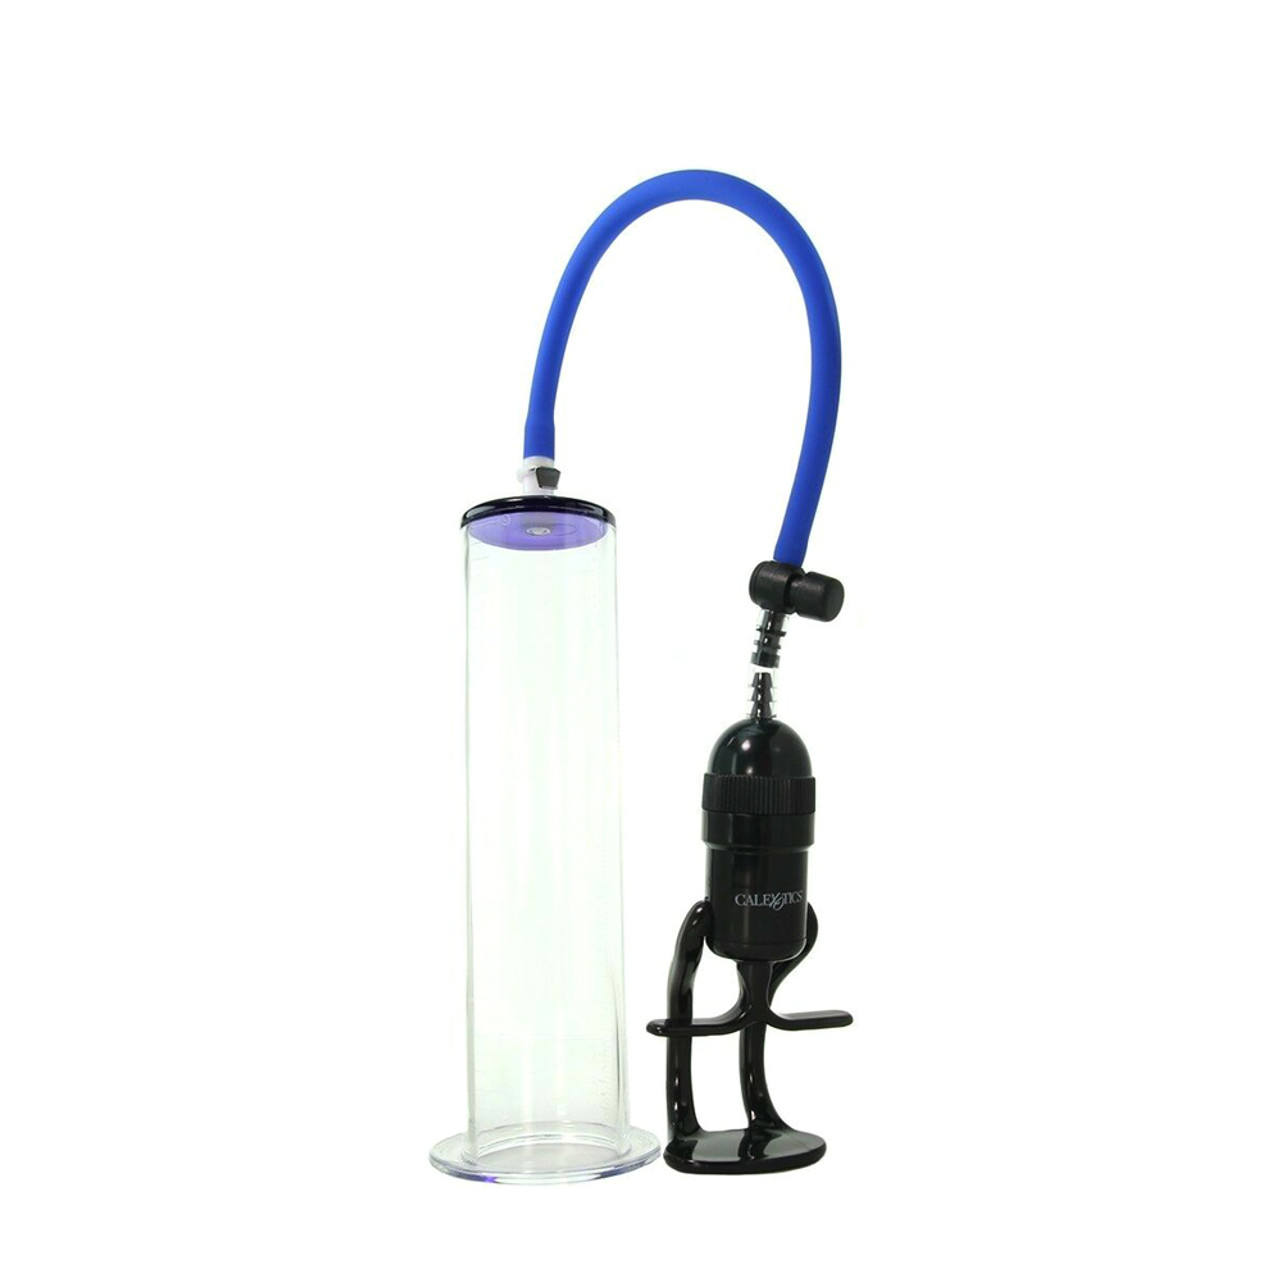 Buy the Performance 12 inch by 2.5 inch Vacuum Penis Pump Cylinder